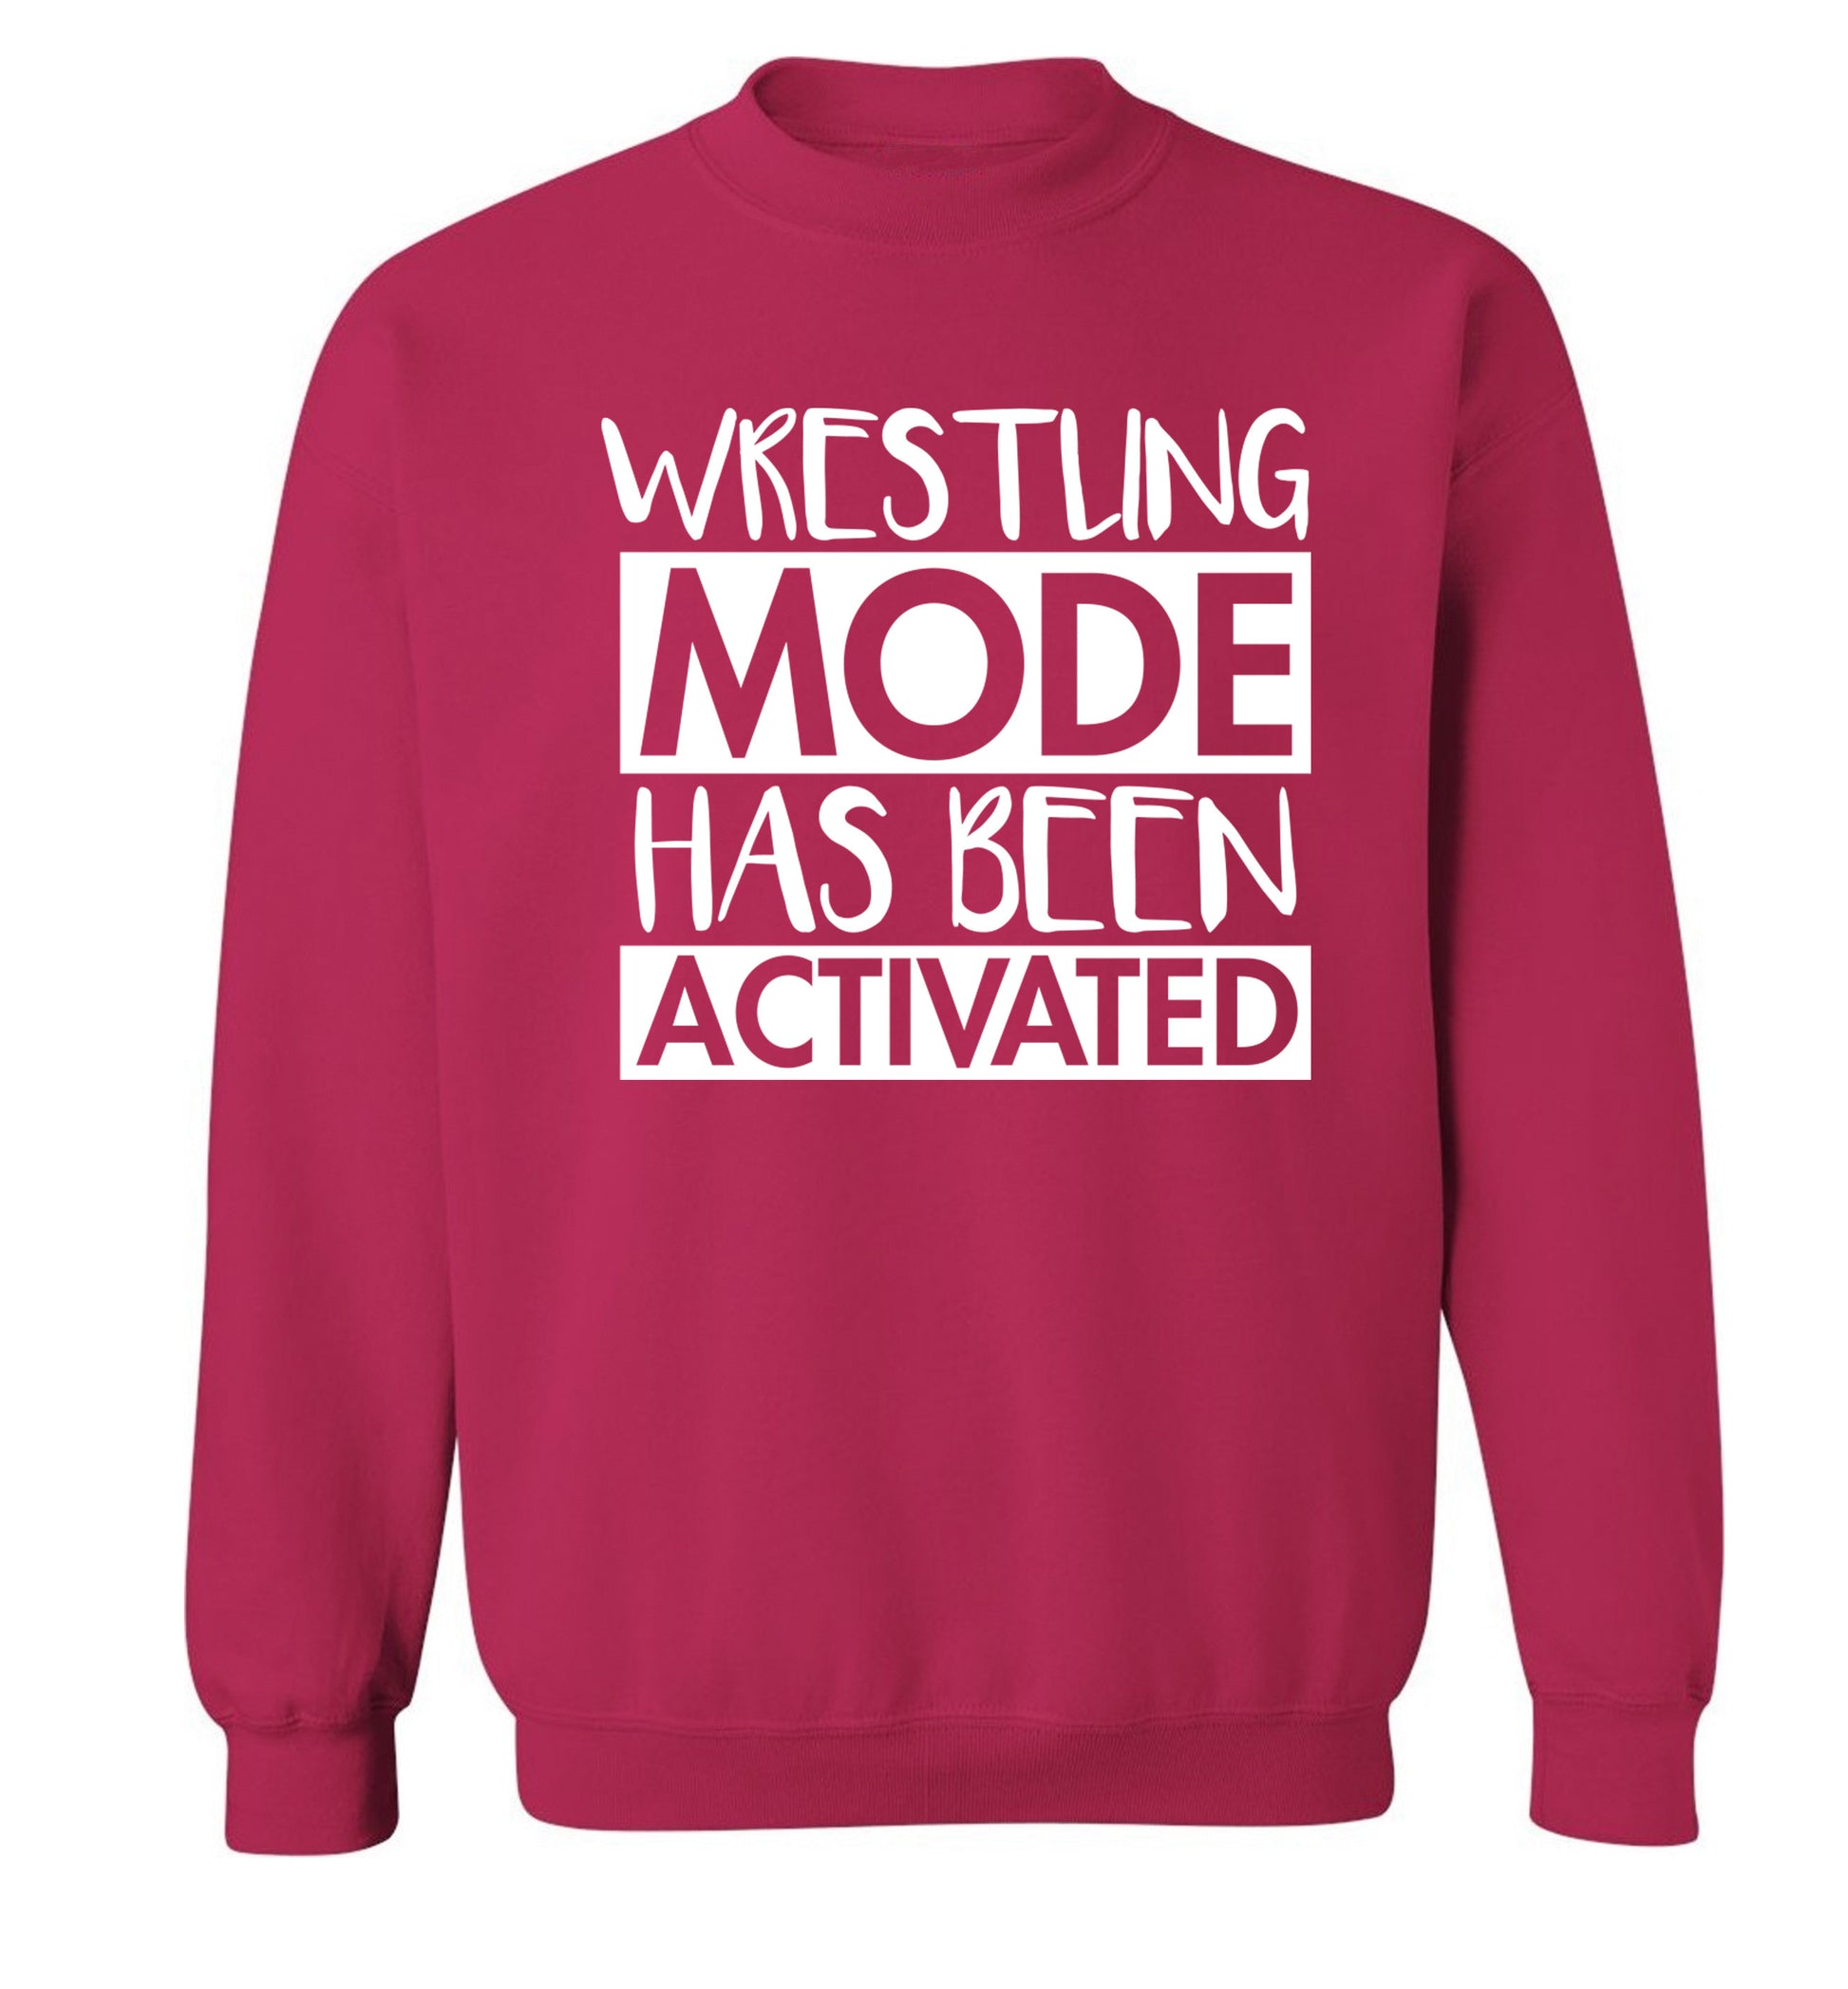 Wresting mode activated Adult's unisex pink Sweater 2XL